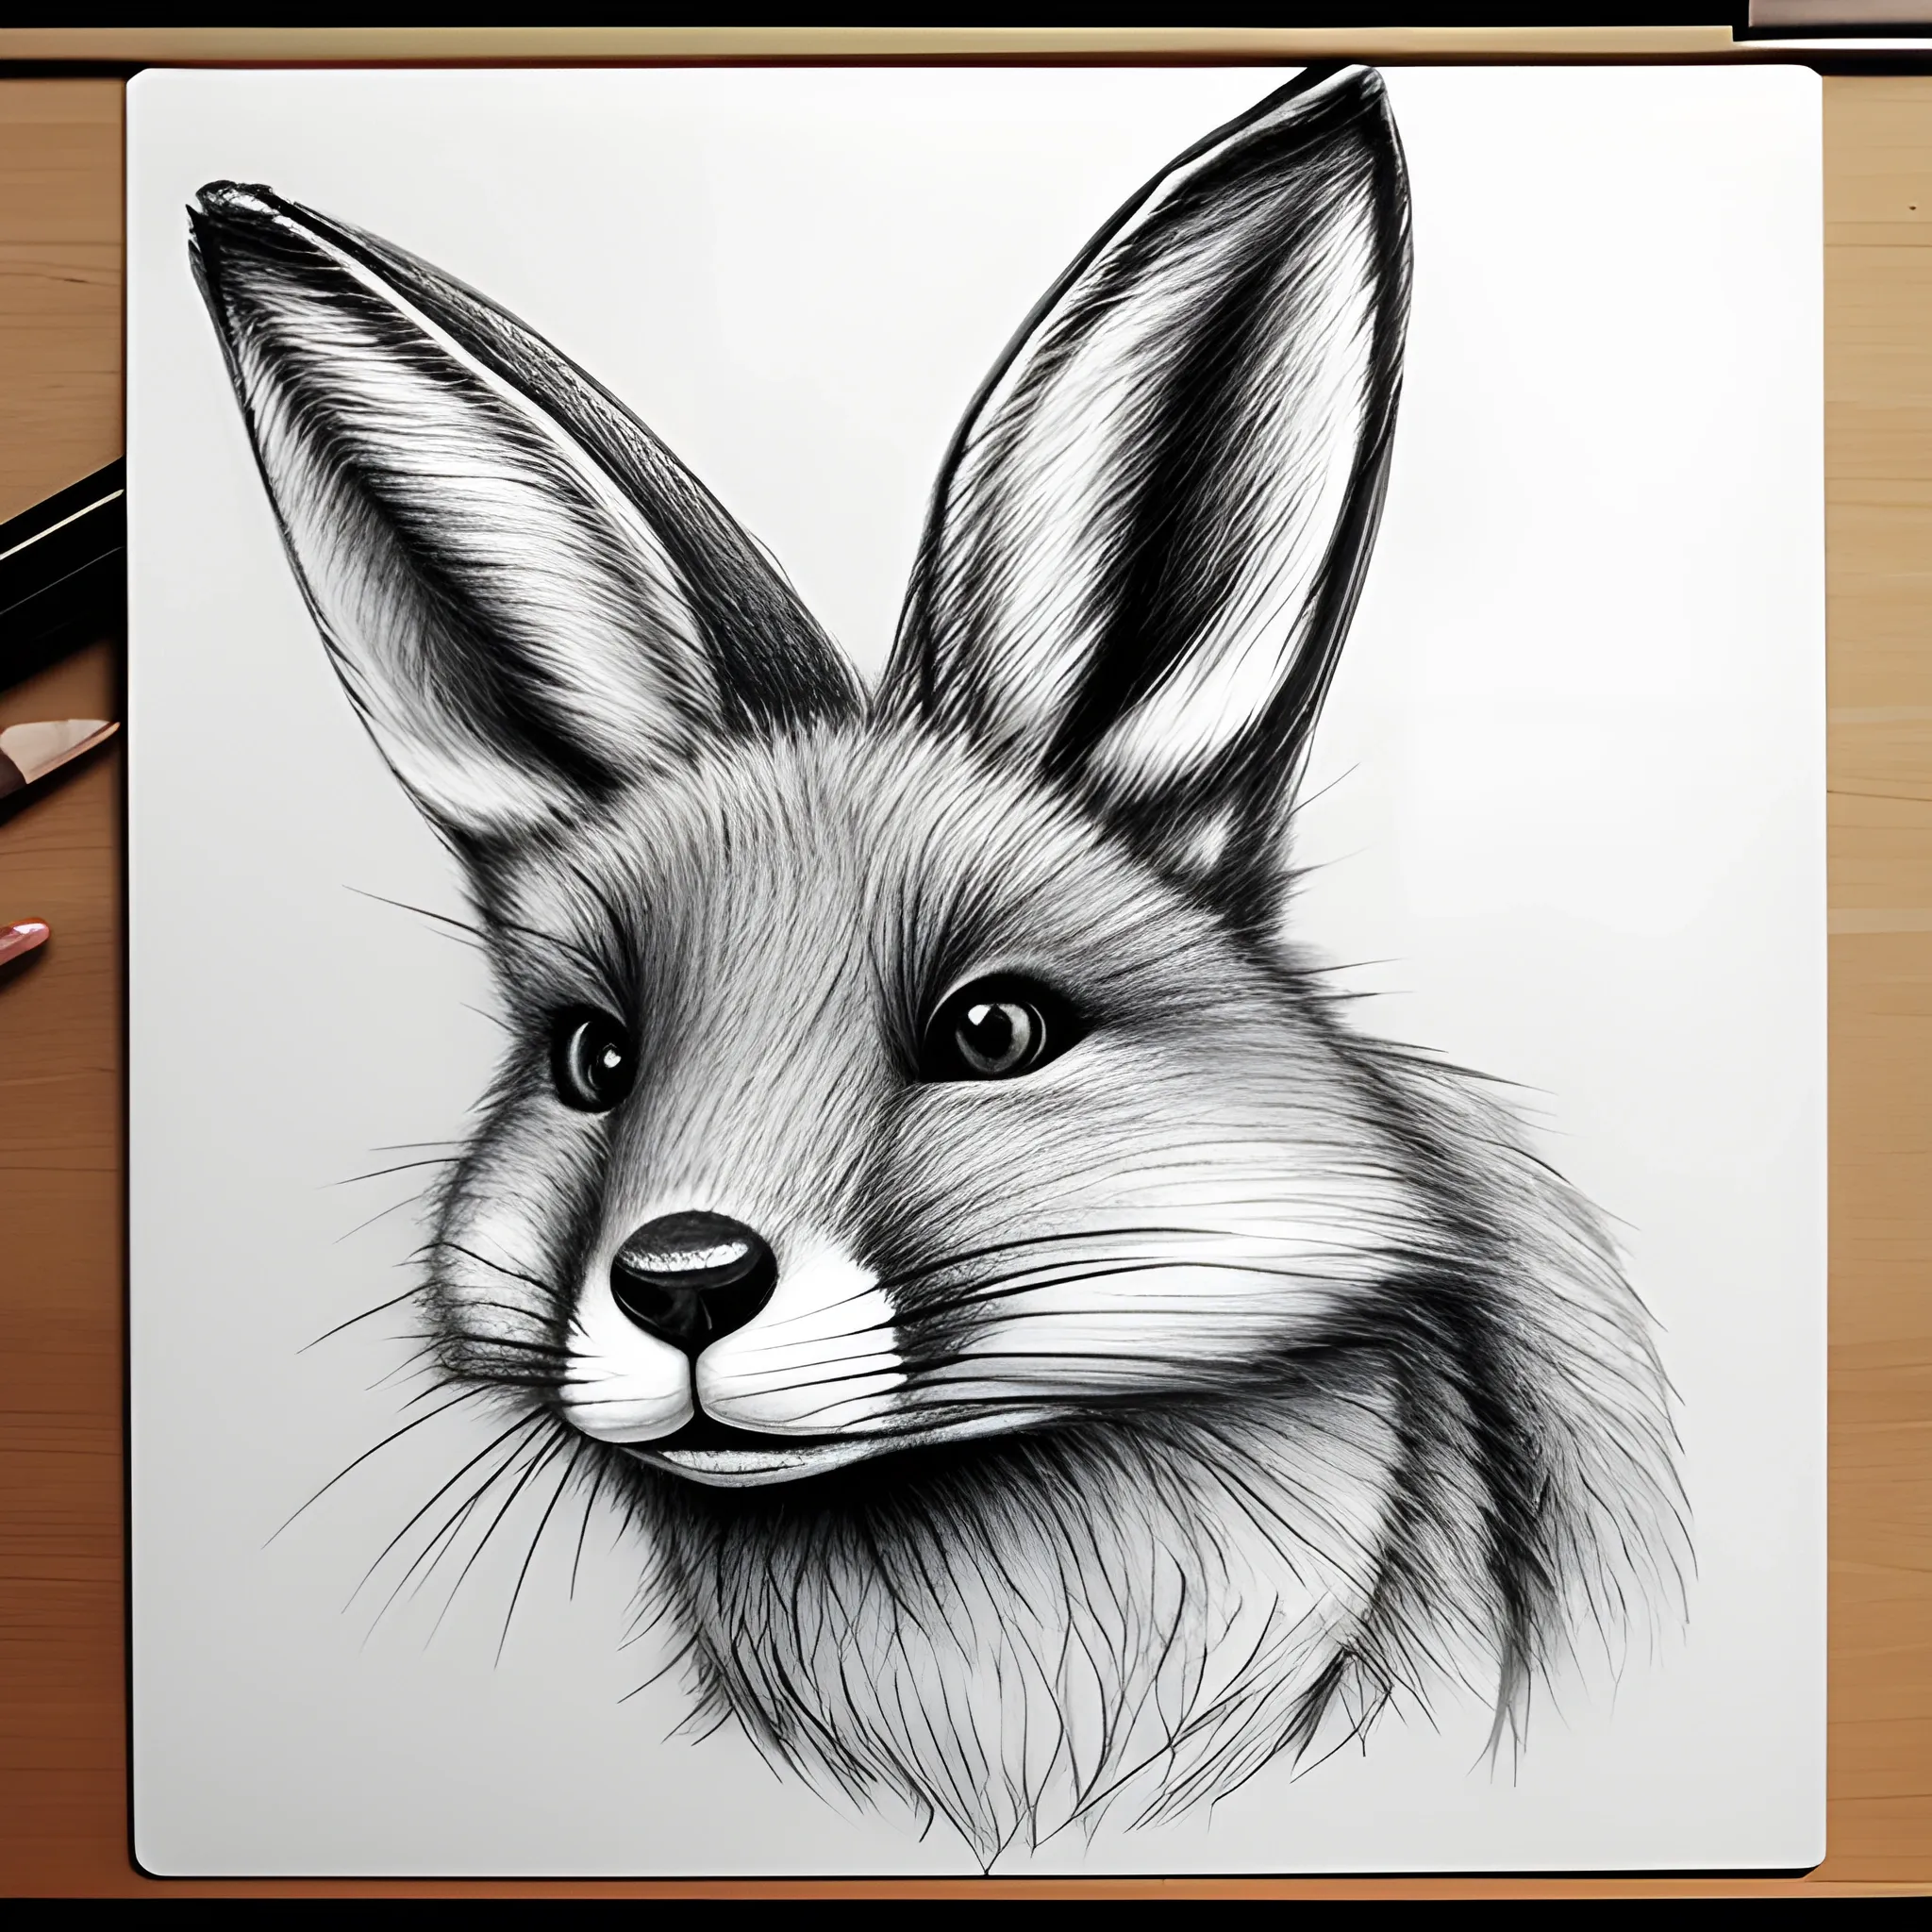 Rabbit/Bunny Pencil Drawing by AlmightyBhunivelze on DeviantArt